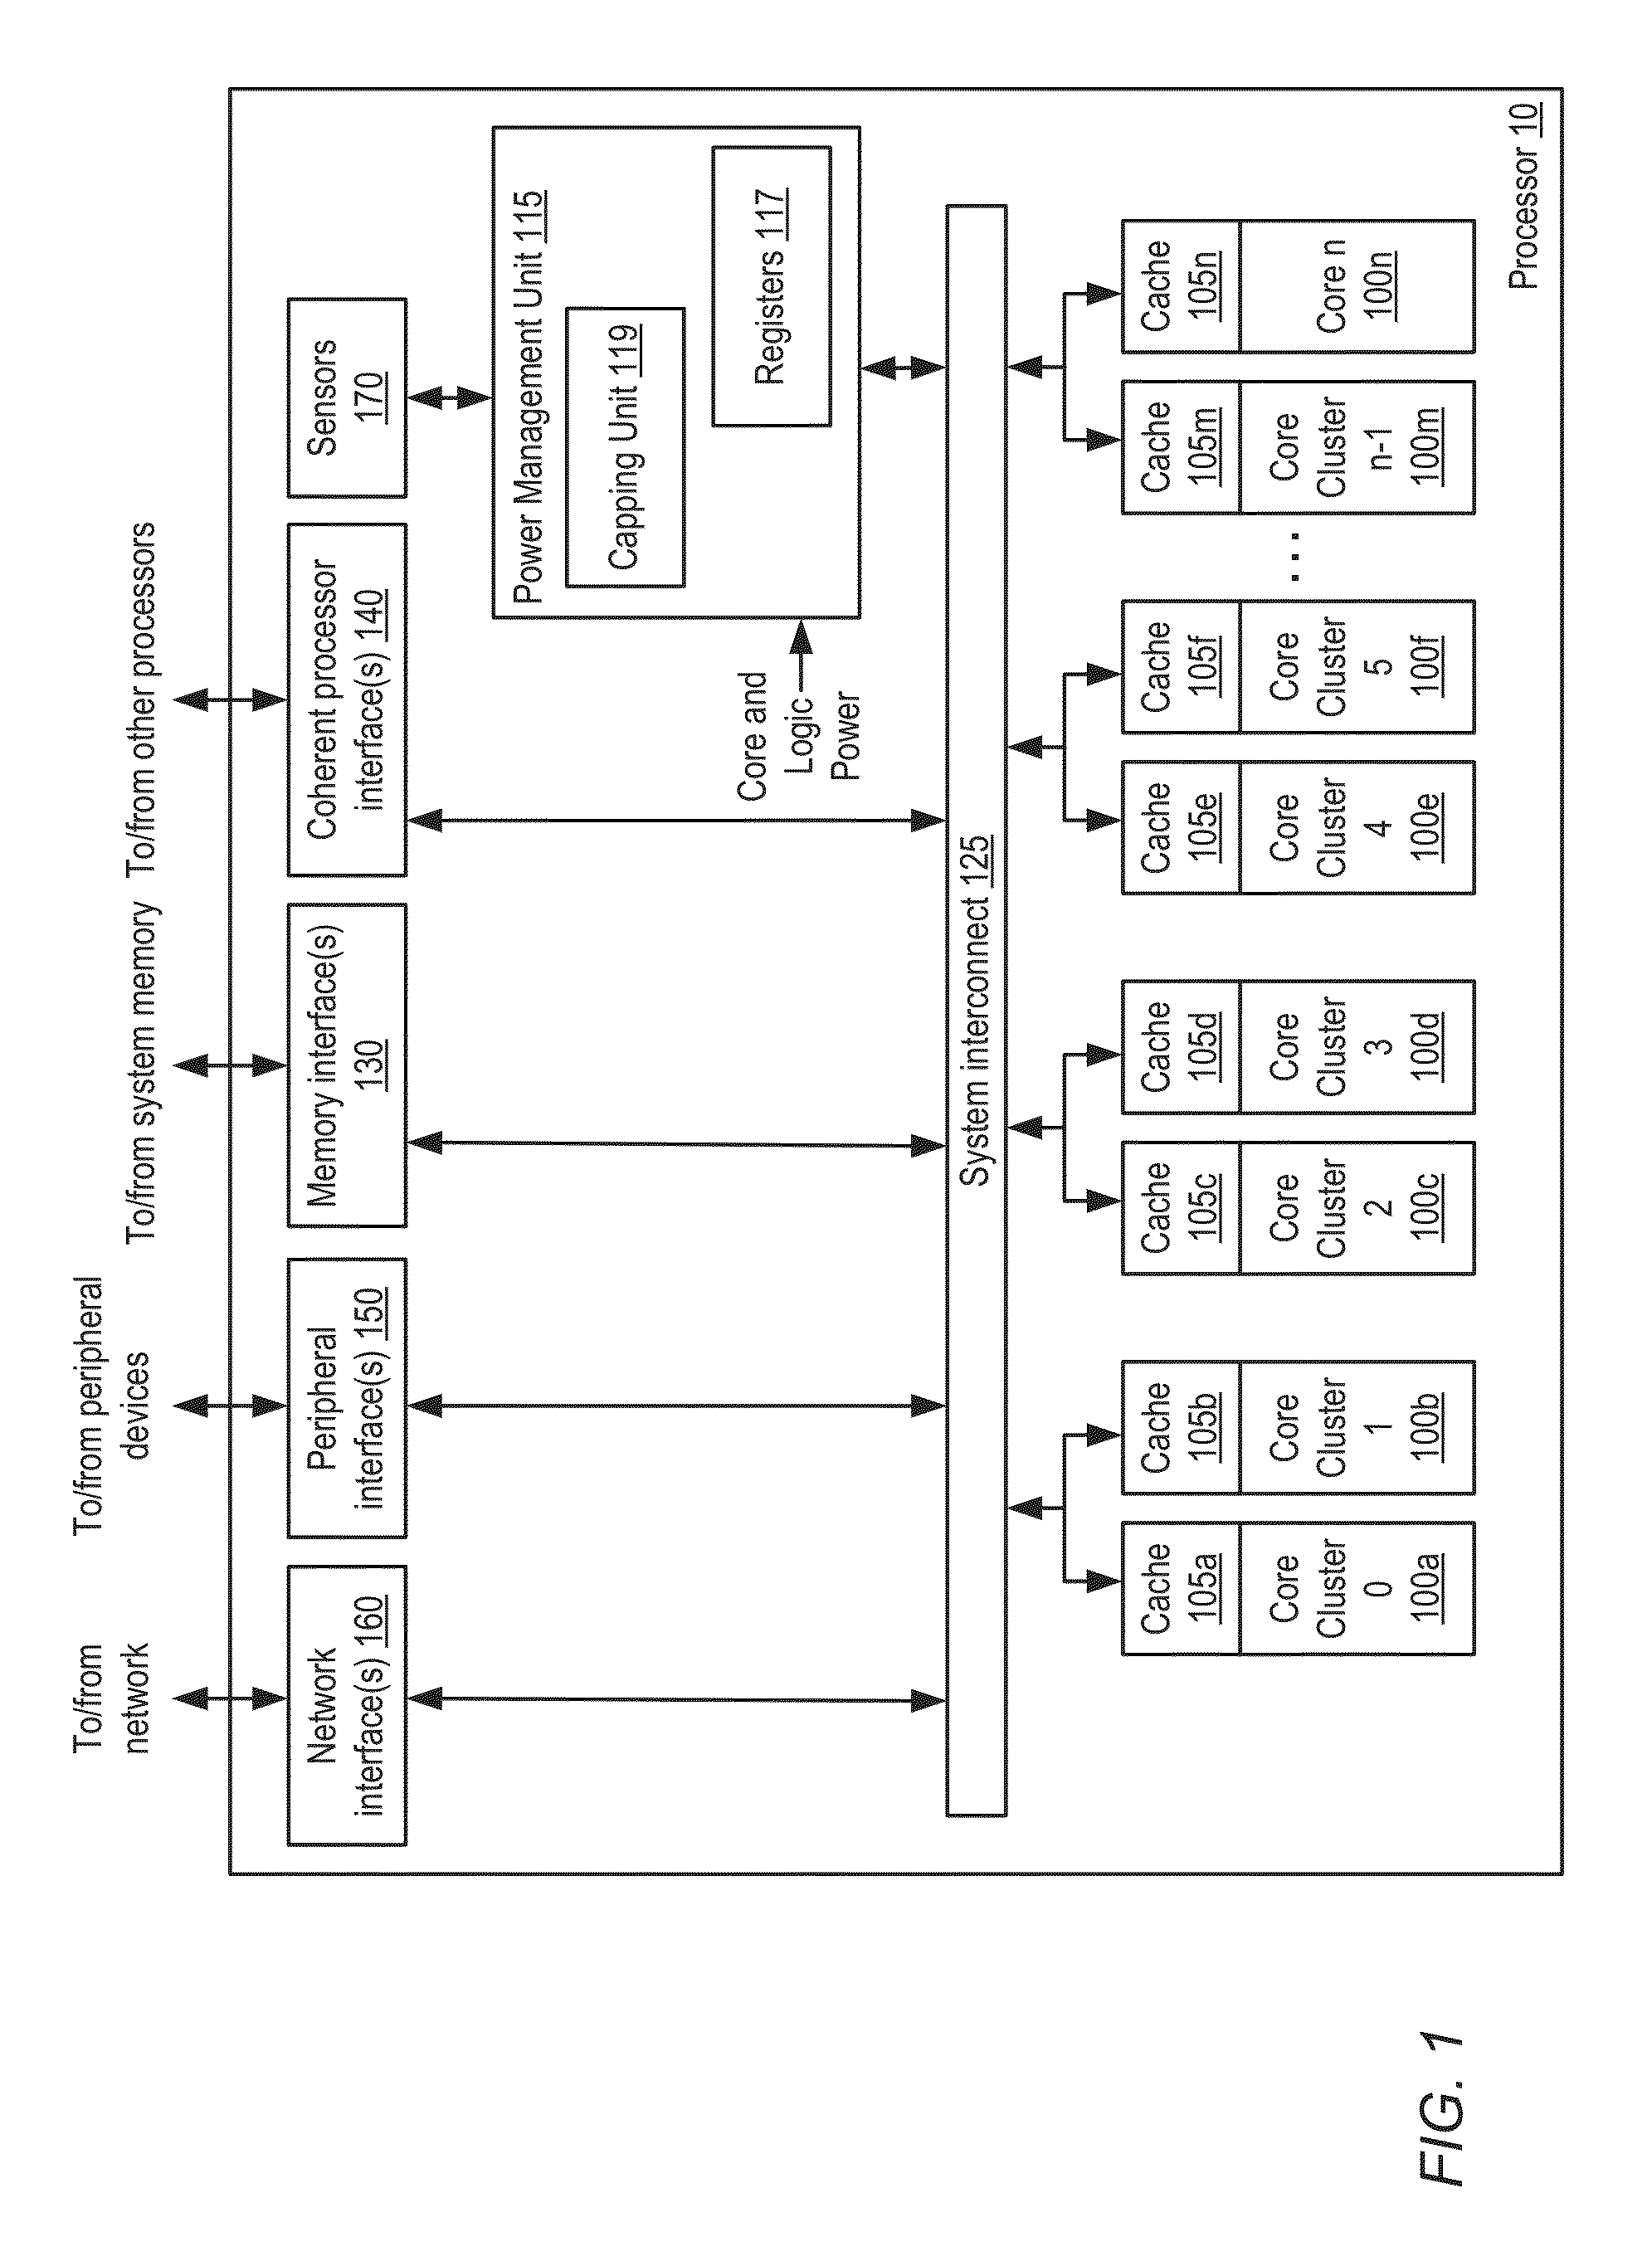 System and method for managing power in a chip multiprocessor using a proportional feedback mechanism